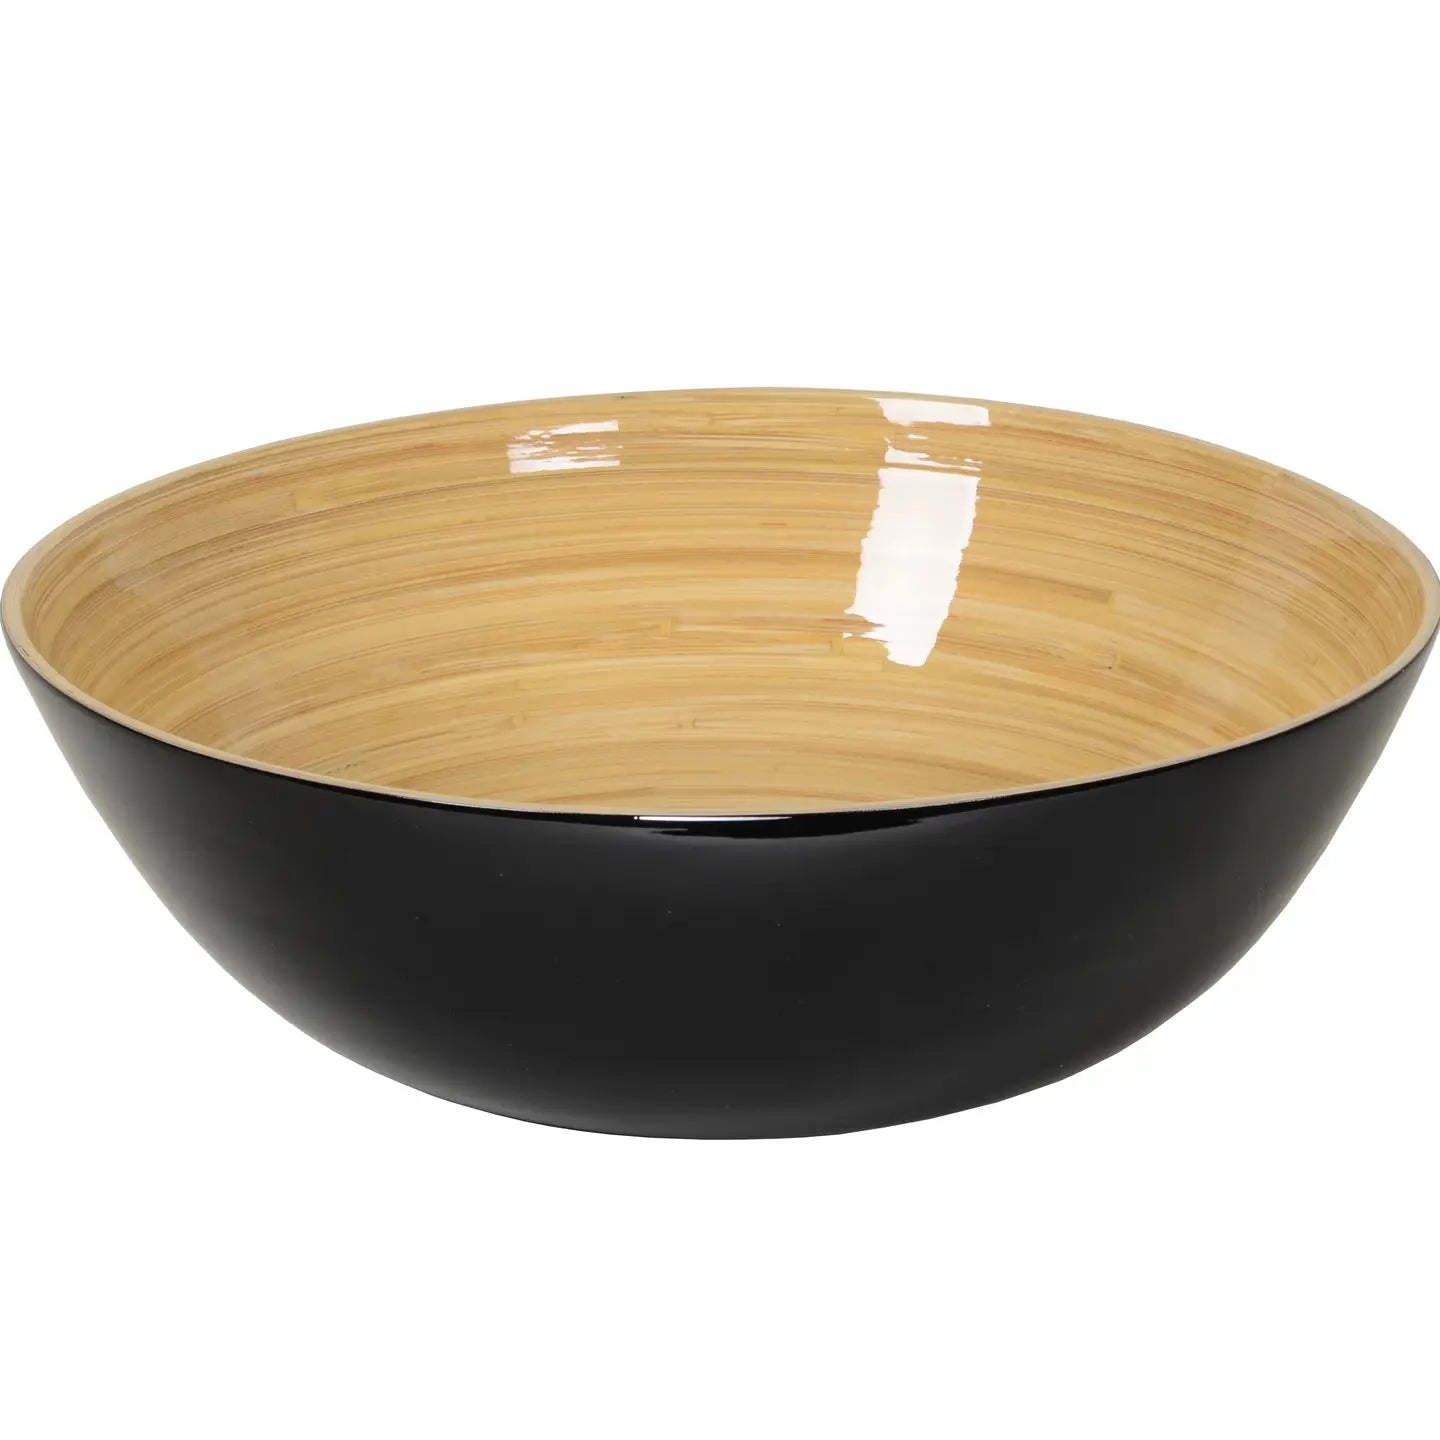 Bamboo Classic Bowl and Serving Set - Black